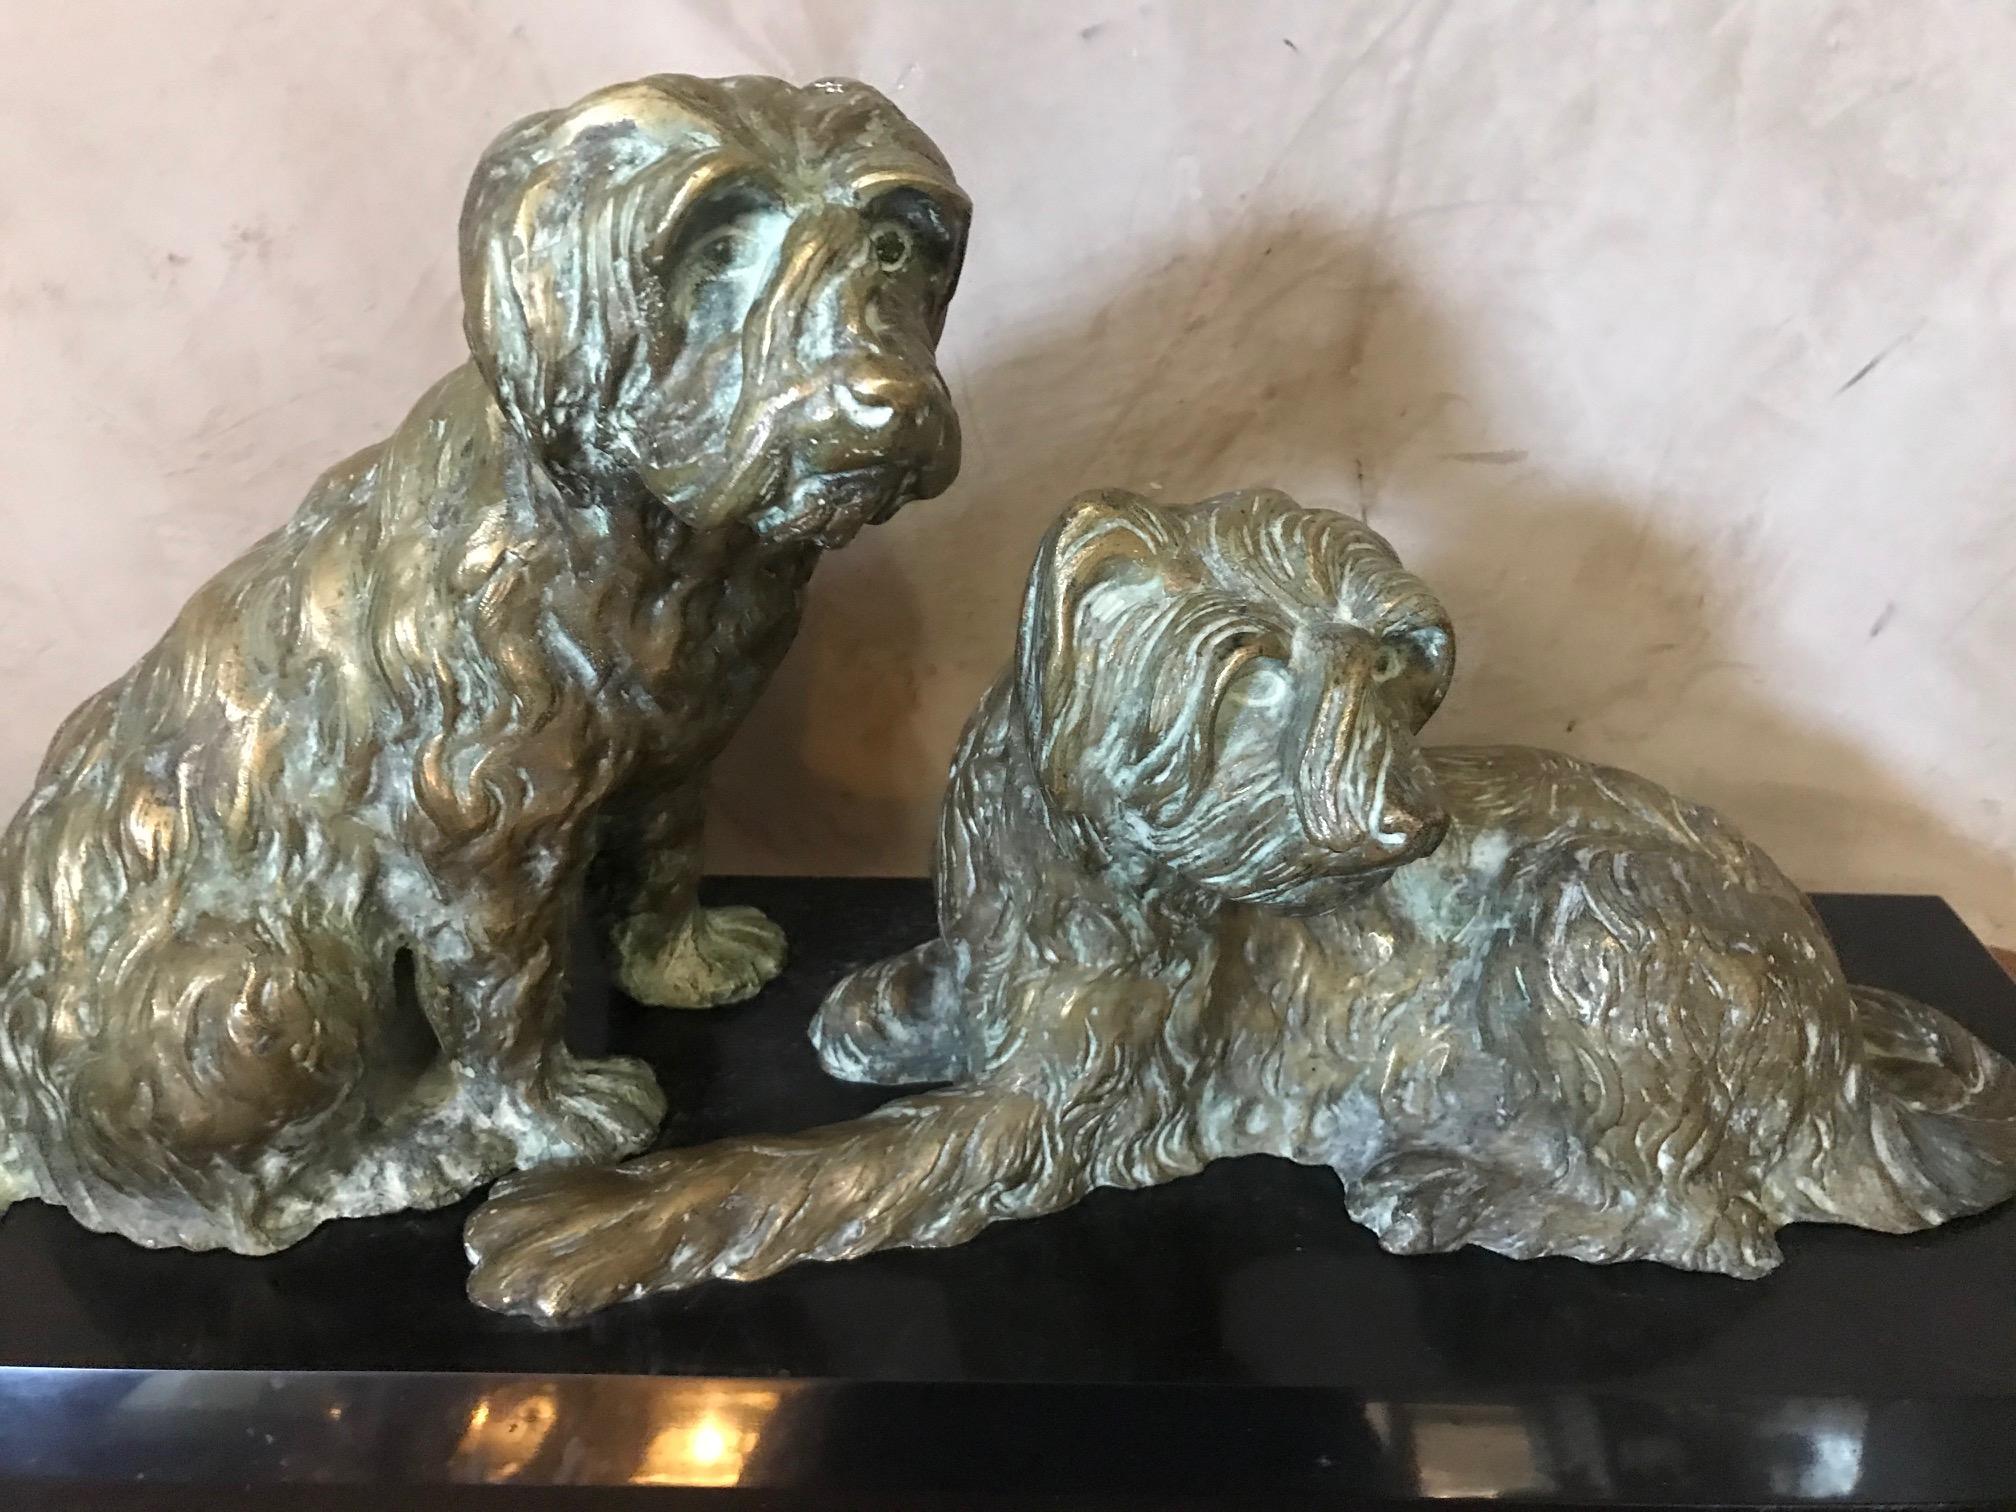 Exceptional 20th century marble and bronze Georges Lavroff dogs sculpture from the 1930s.
Beautiful bronze representing two dogs. The signature of Georges Lavroff is on the seating dog's tail. Black Marble base.
George Lavroff was born in Siberia